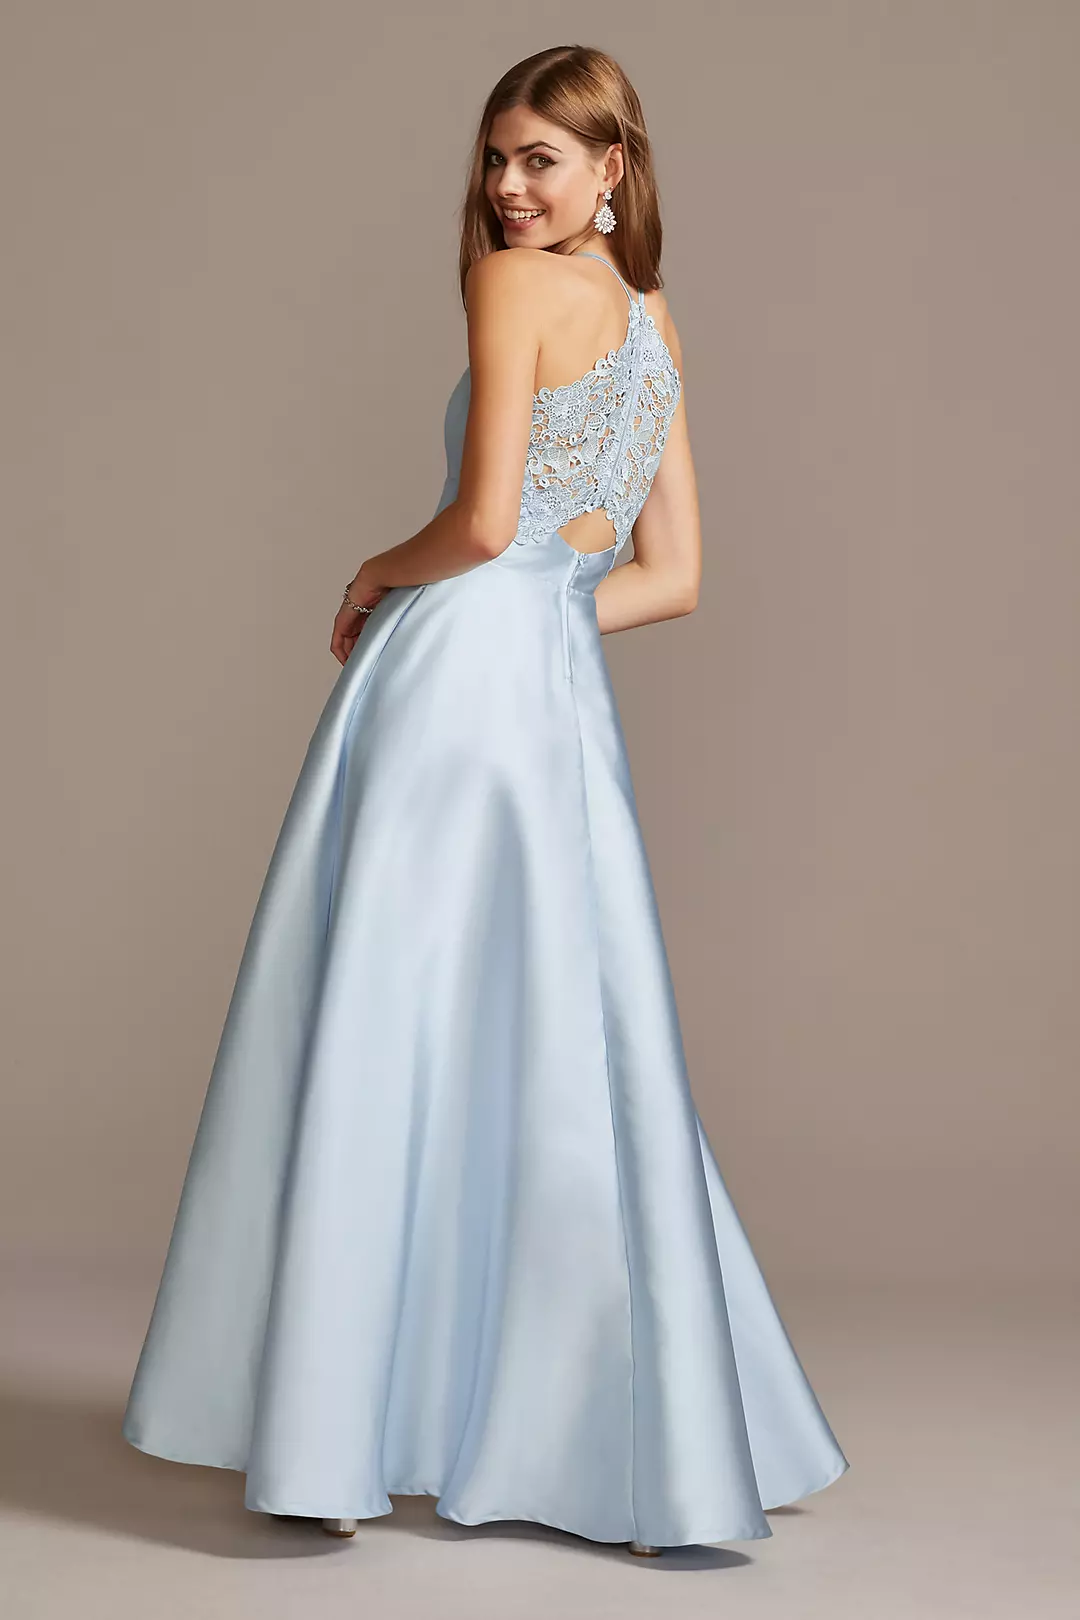 Satin Illusion Accent V-Neck Gown with Lace Back Image 2